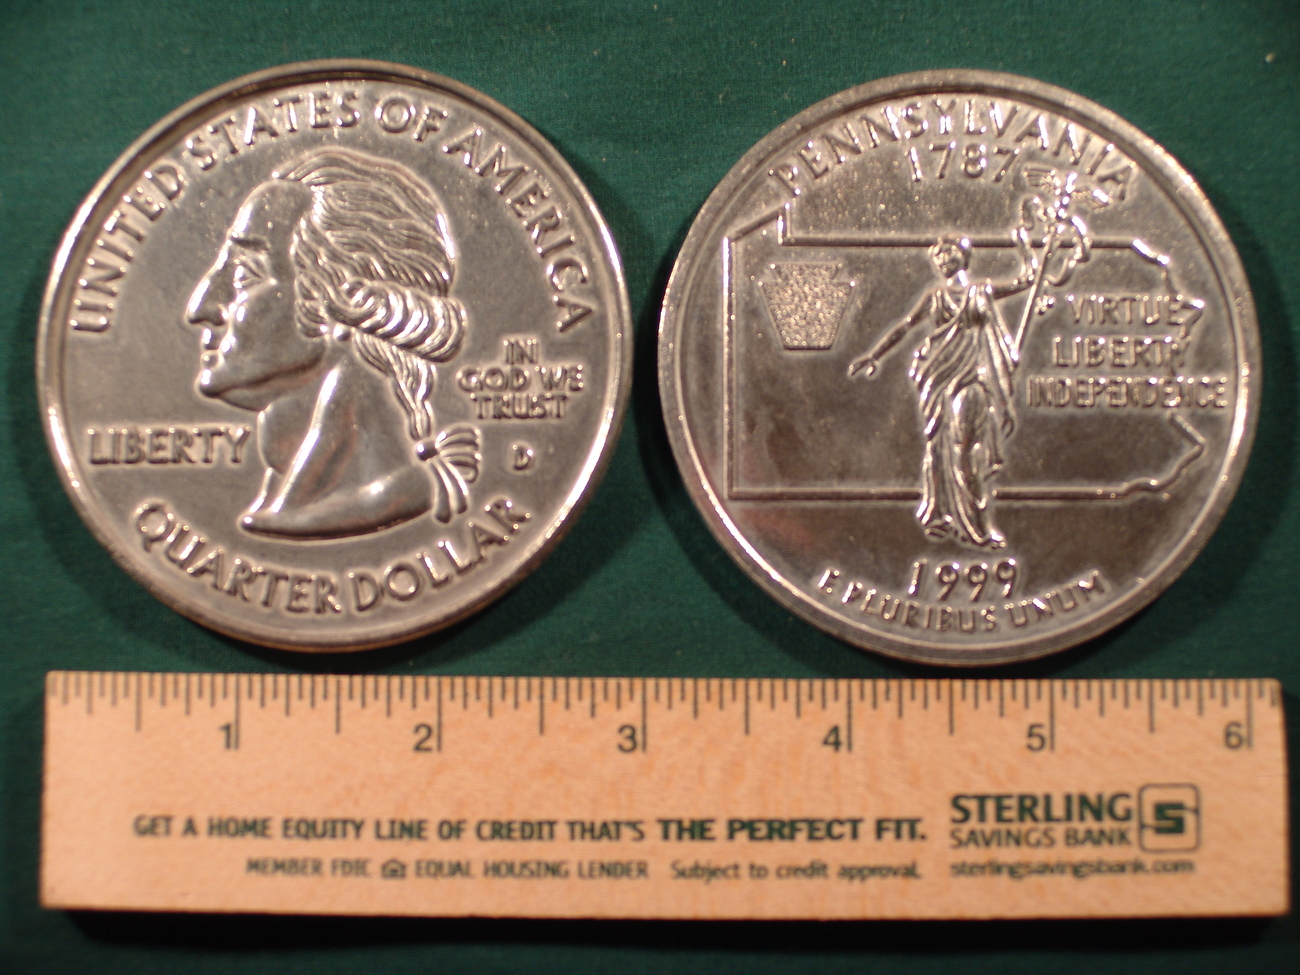 Big 3" Inch Metal Coin Replica of a 1999 Issue ...